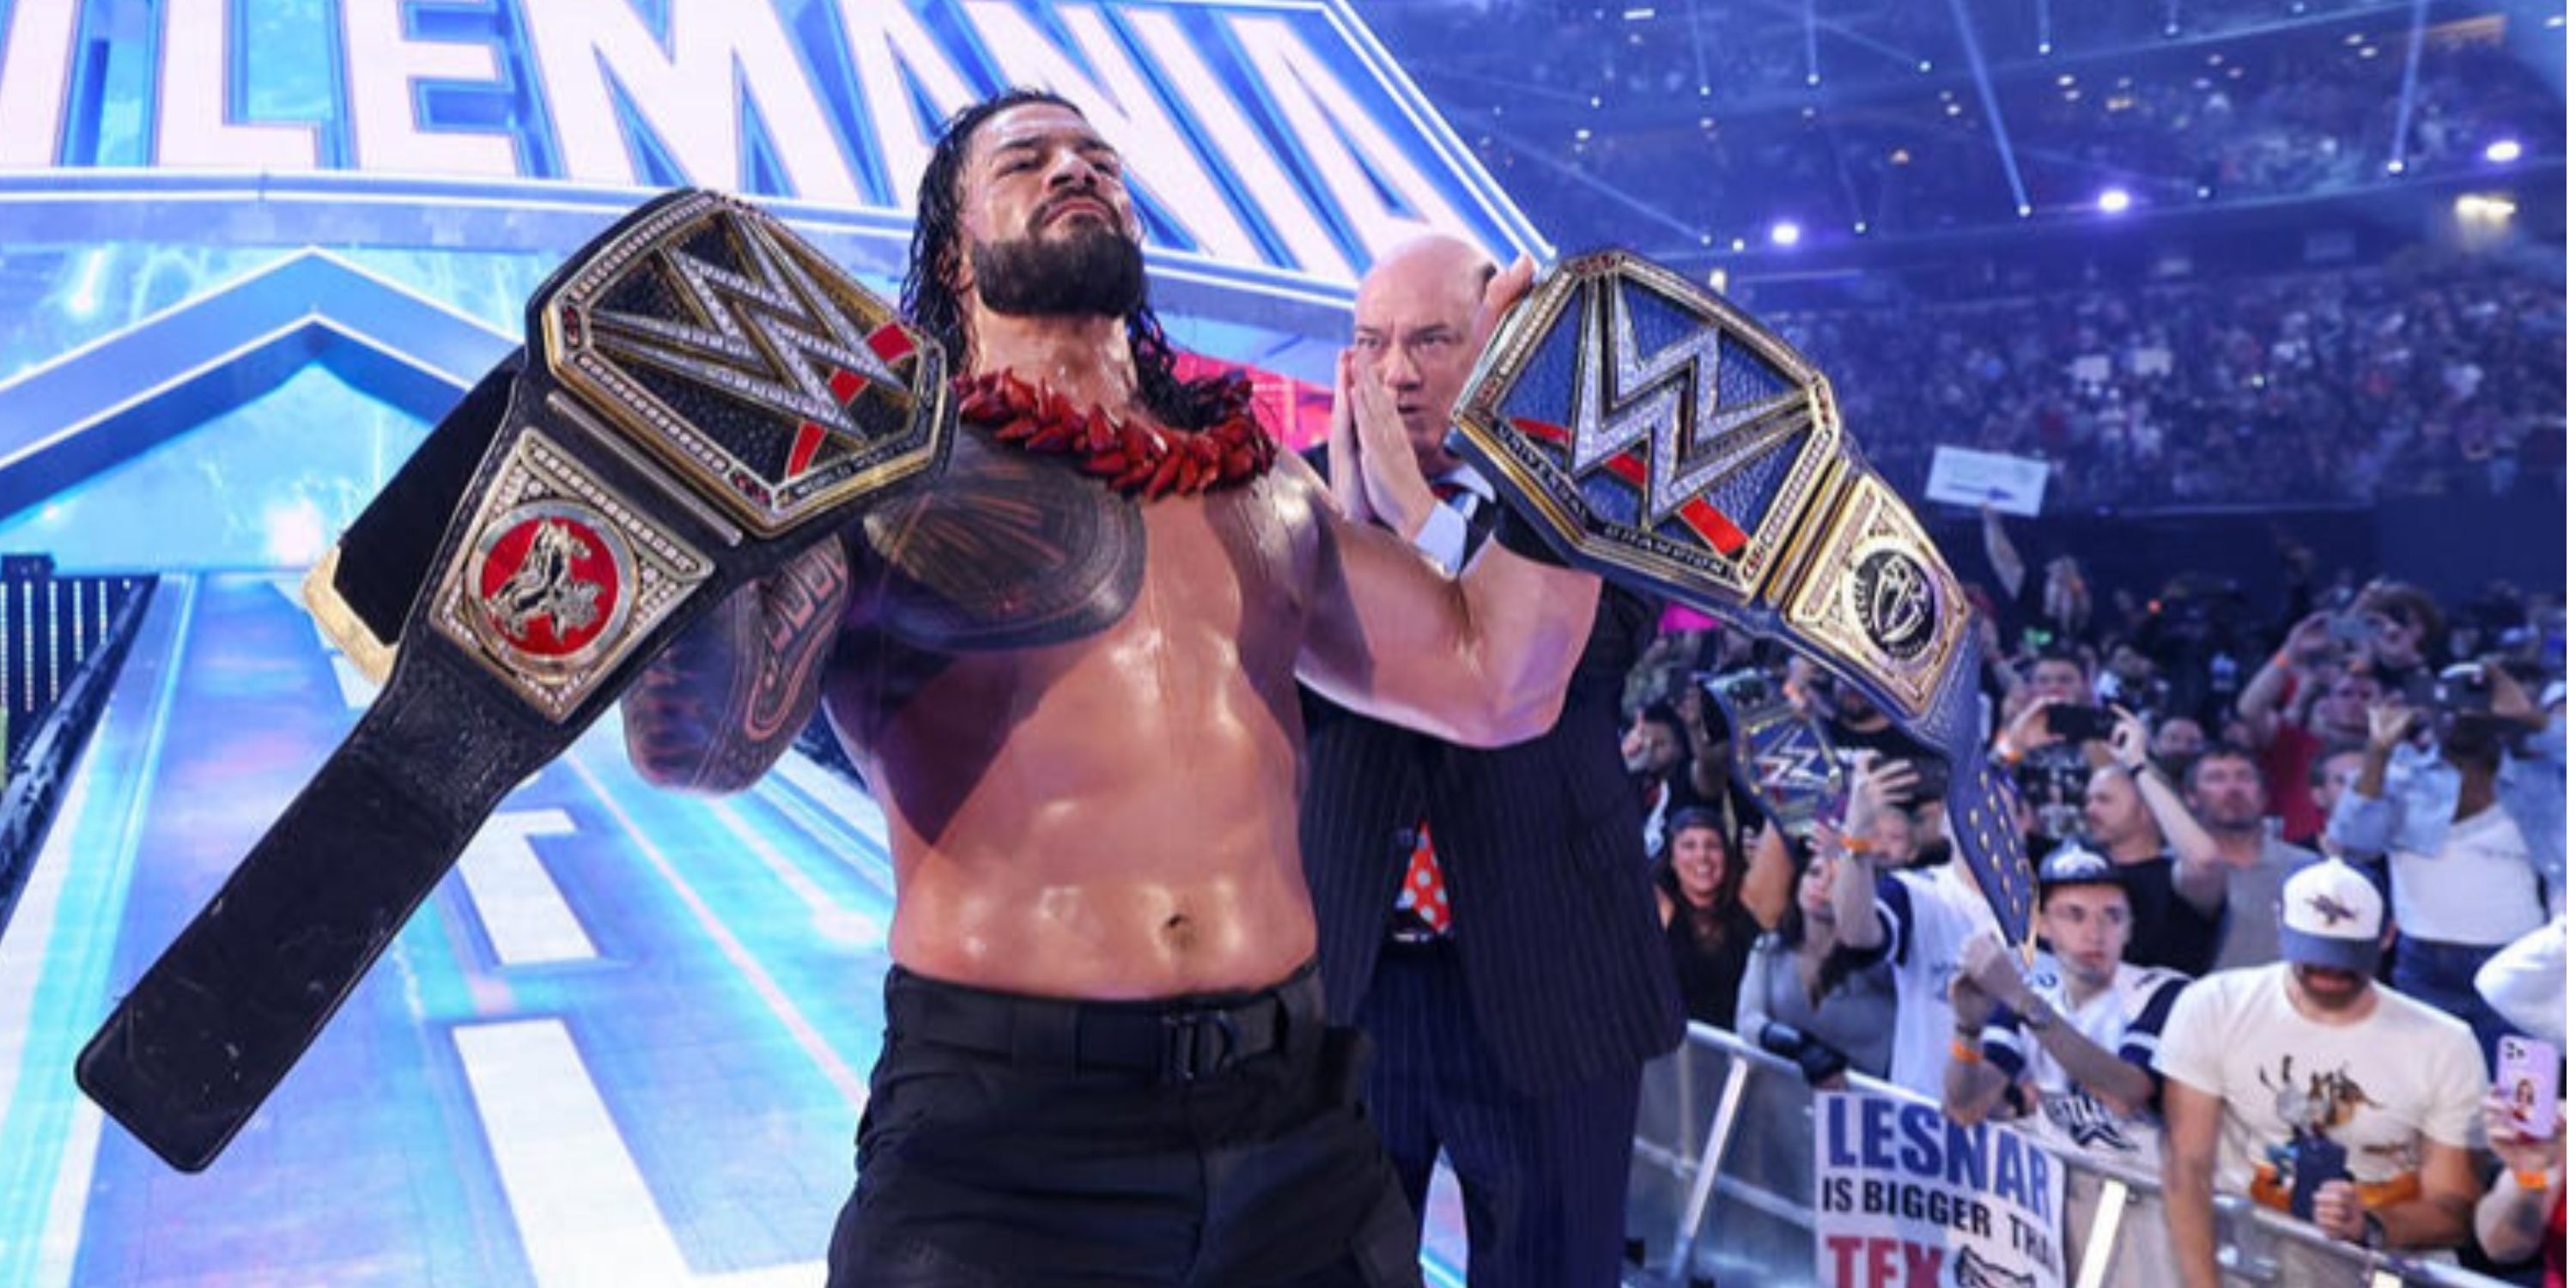 Roman Reigns as a unified champion